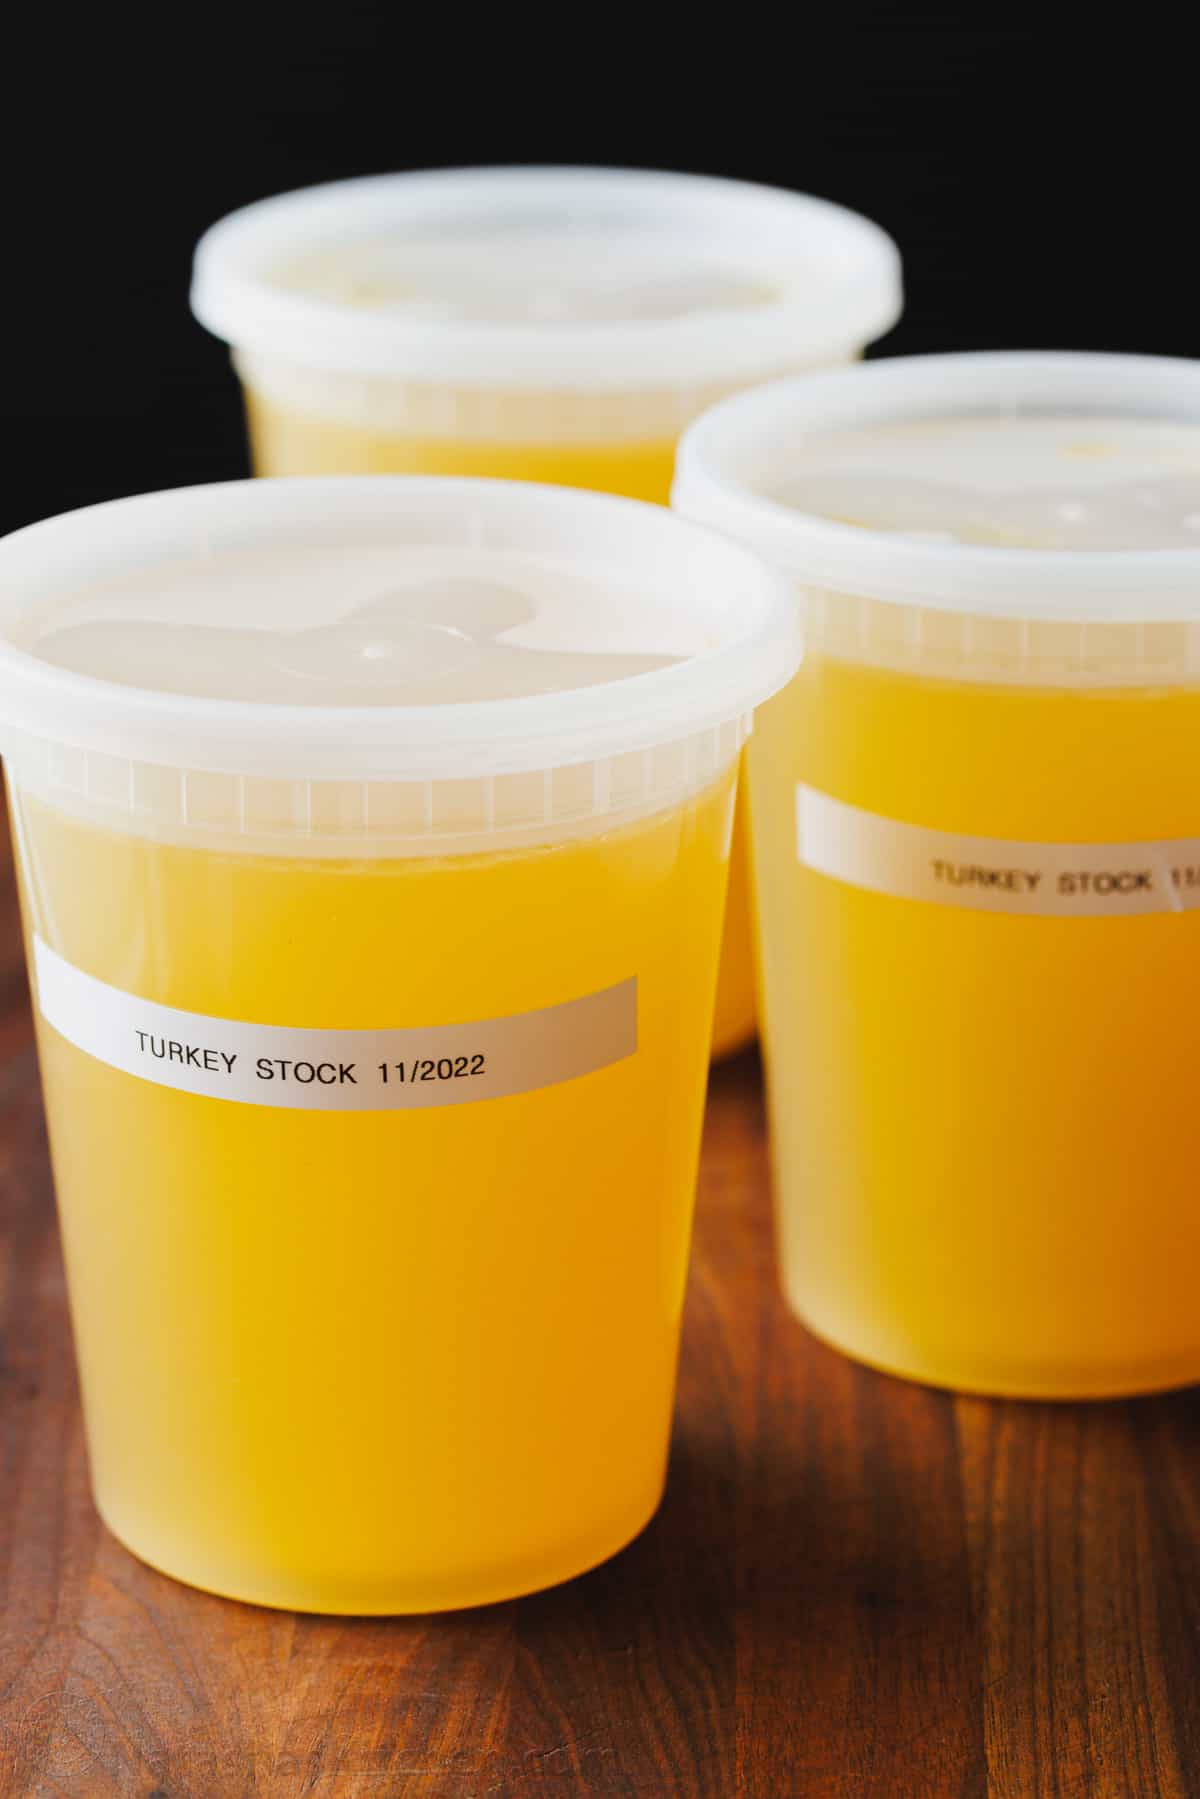 Containers of turkey stock for freezing